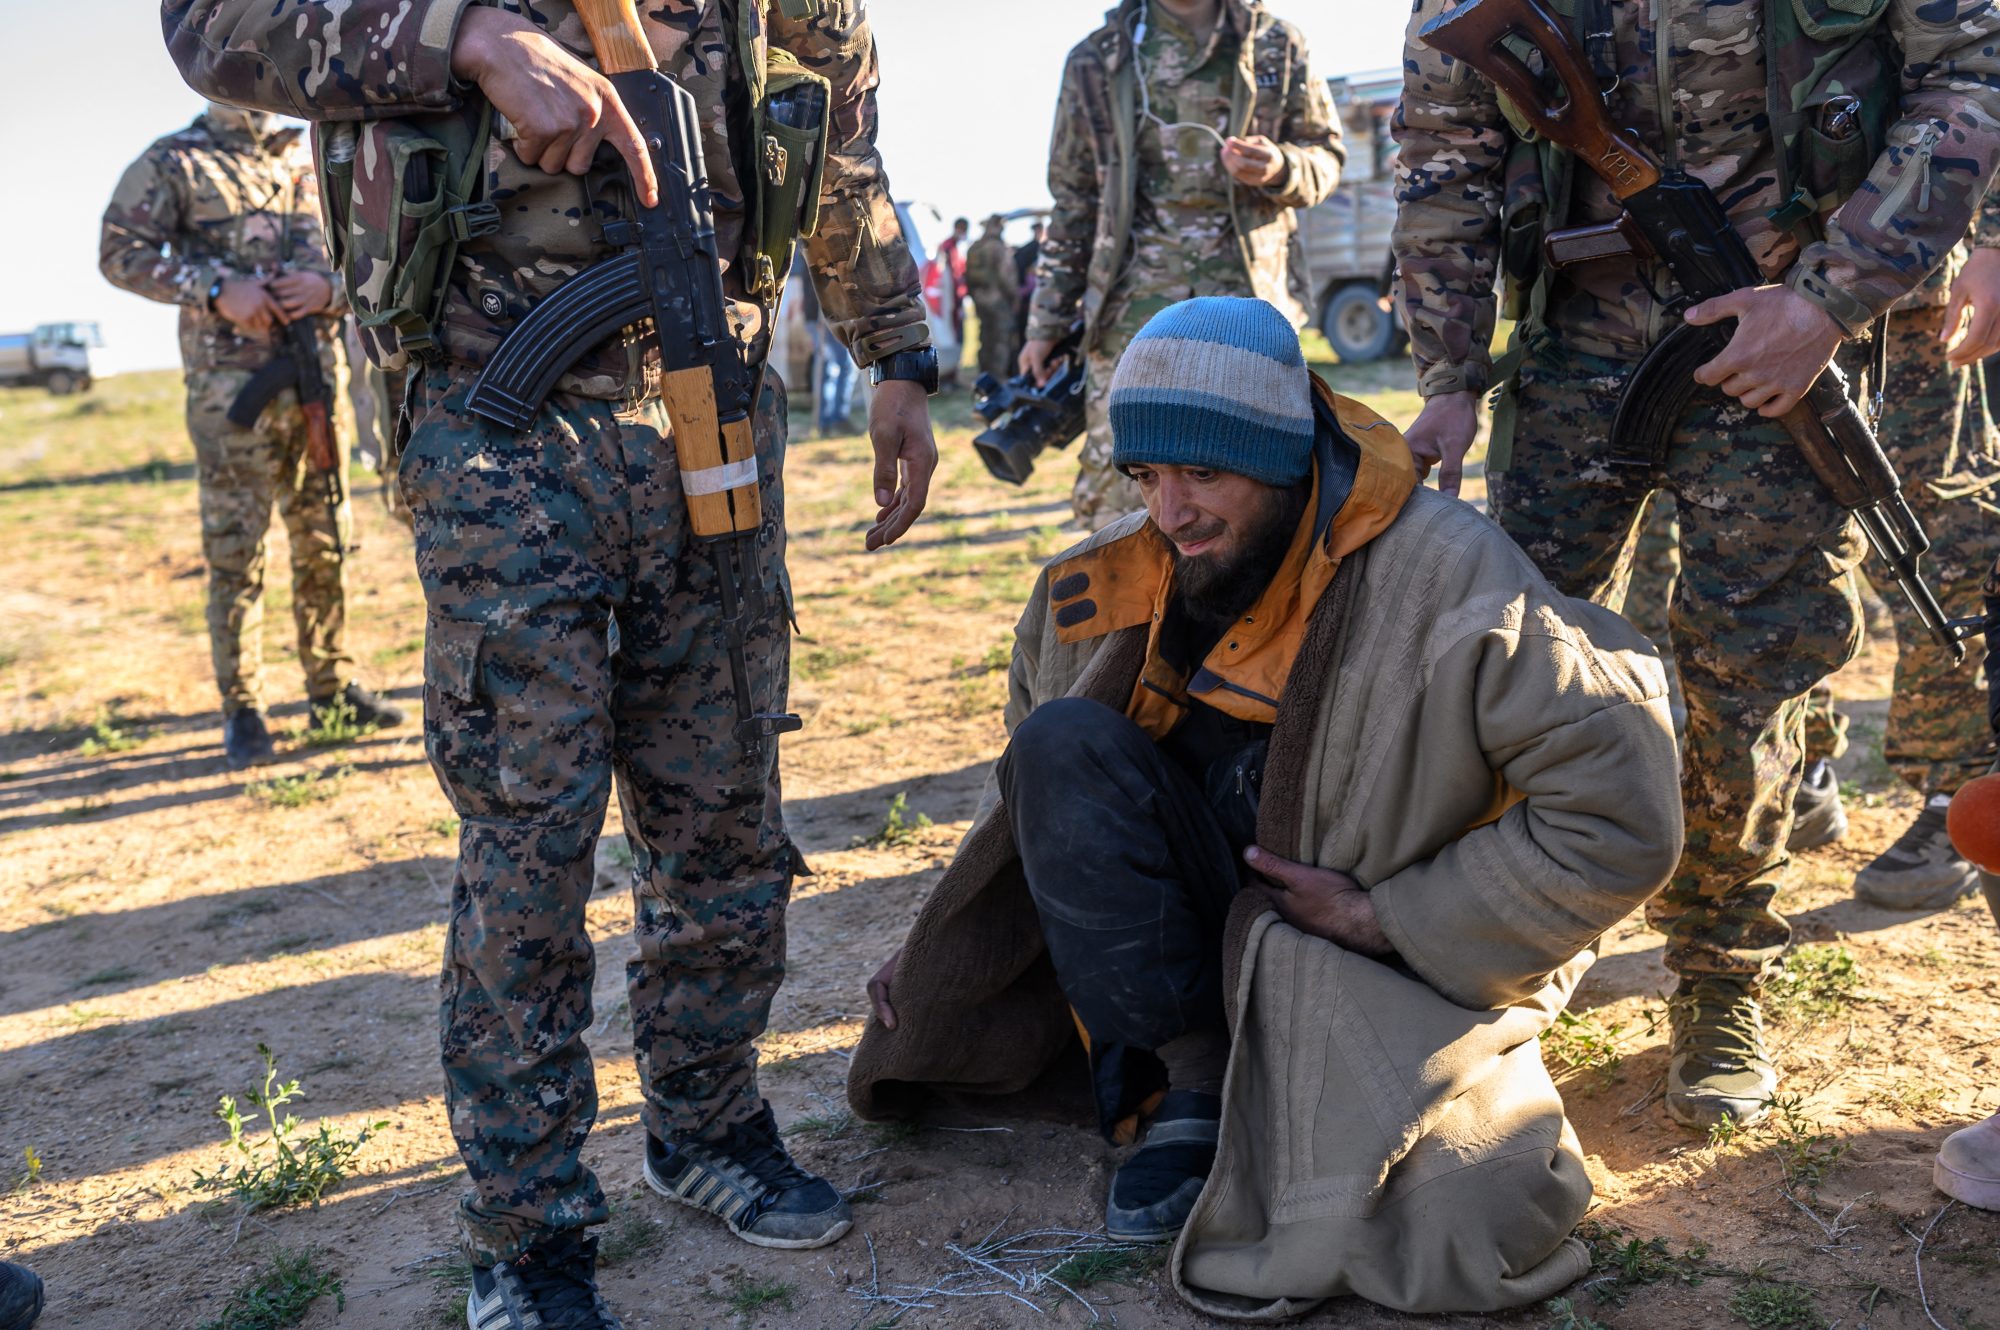 A man from Bosnia suspected of being an Islamic State fighter is searched by members of the Syrian Democratic Forces (SDF) after leaving the IS group's last holdout of Baghouz on 1 March 2019 (AFP)